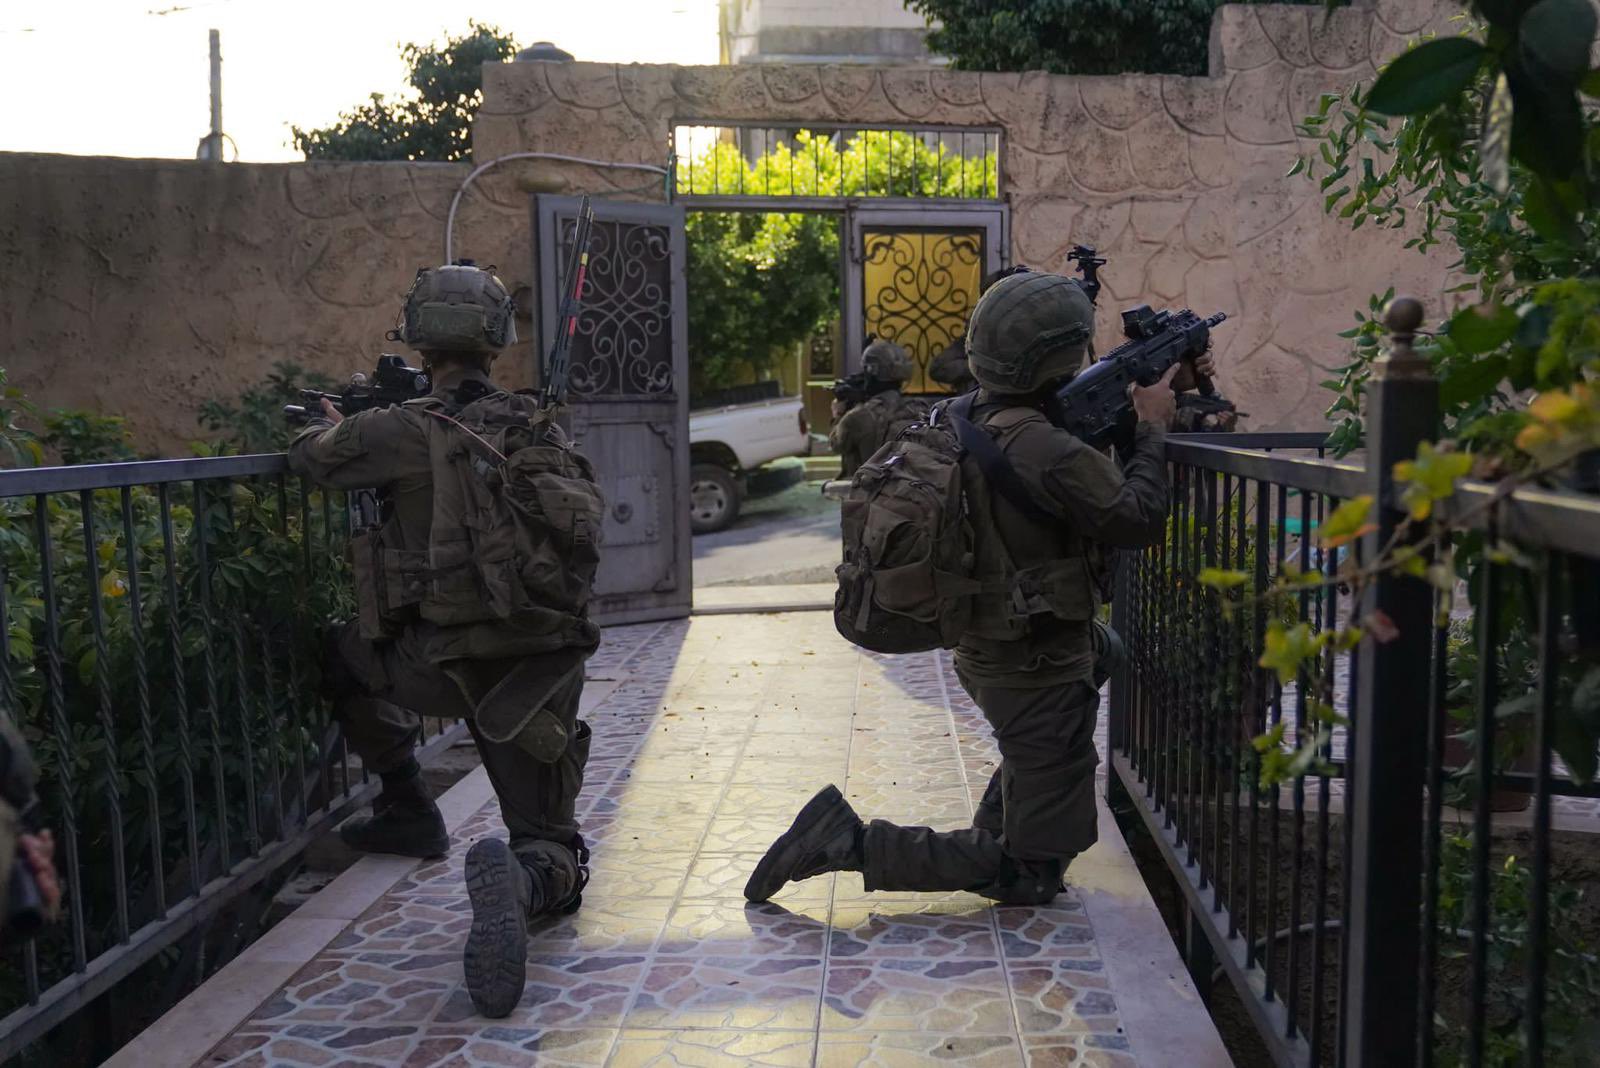 IDF Forces Scan Area For Suspects After Reported Shooting In West Bank -  I24NEWS